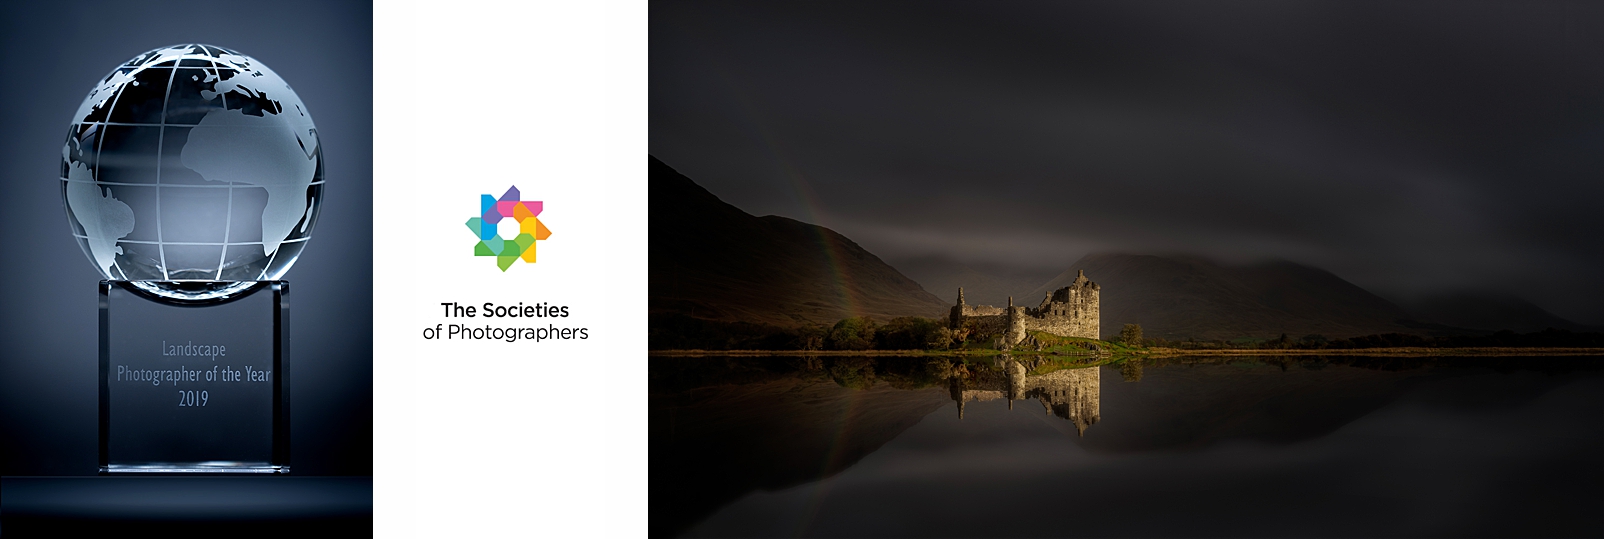 Chris chambers landscape photographer of the year award